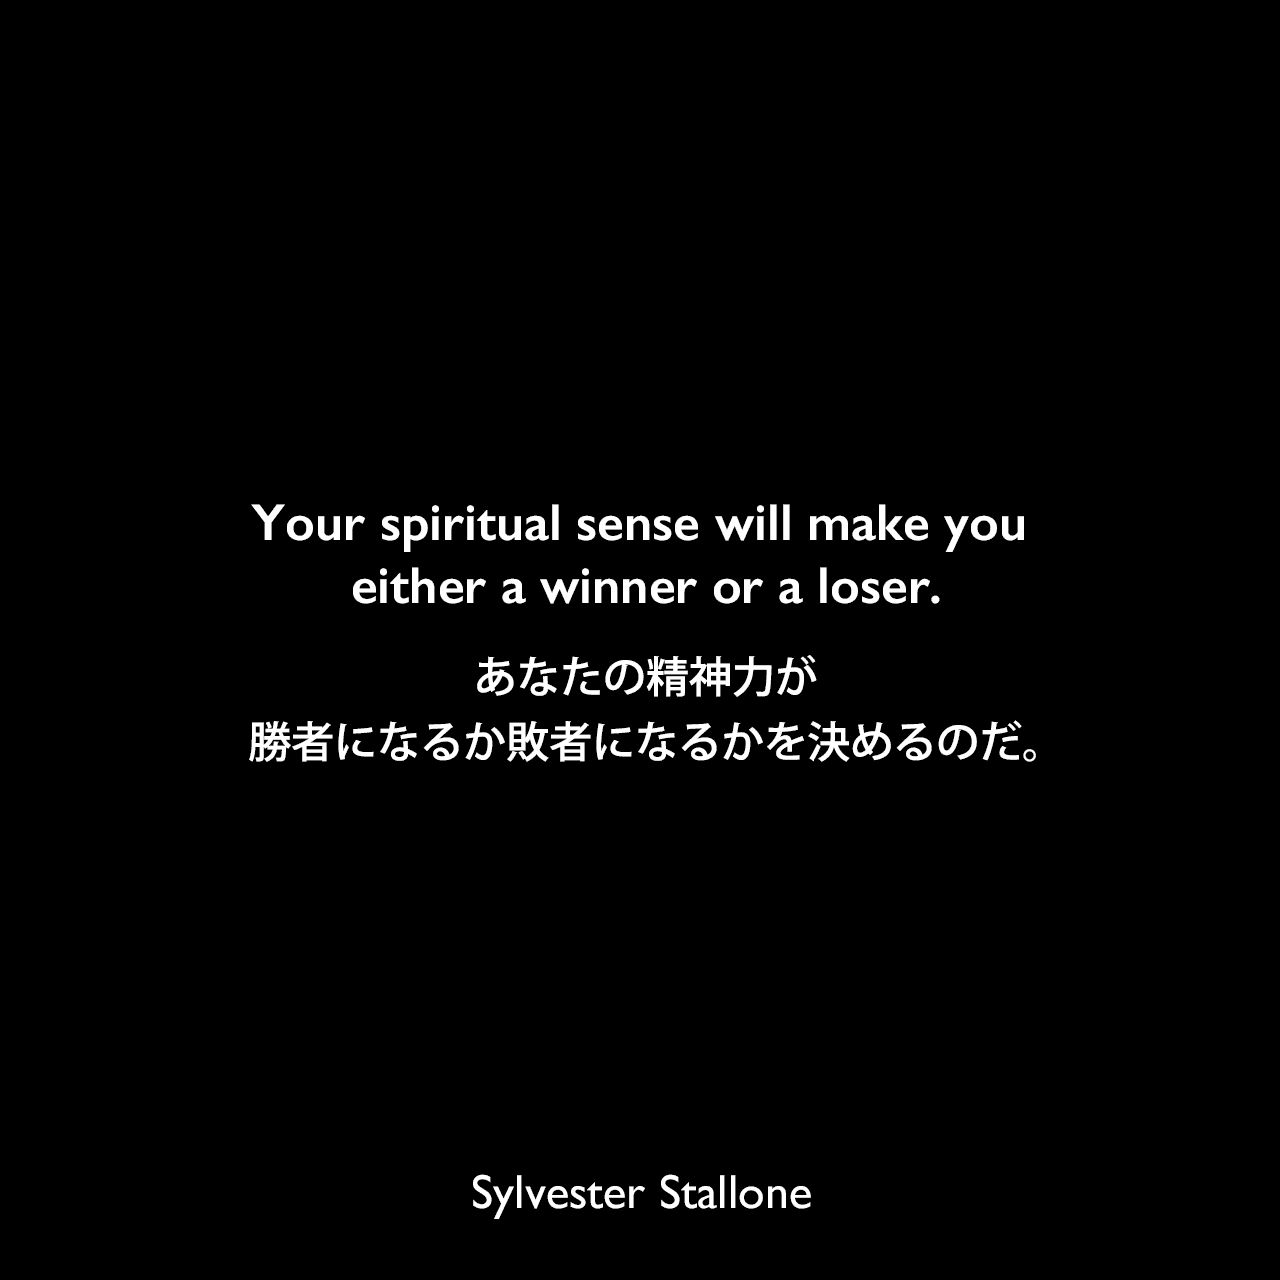 Your spiritual sense will make you either a winner or a loser.あなたの精神力が、勝者になるか敗者になるかを決めるのだ。Sylvester Stallone